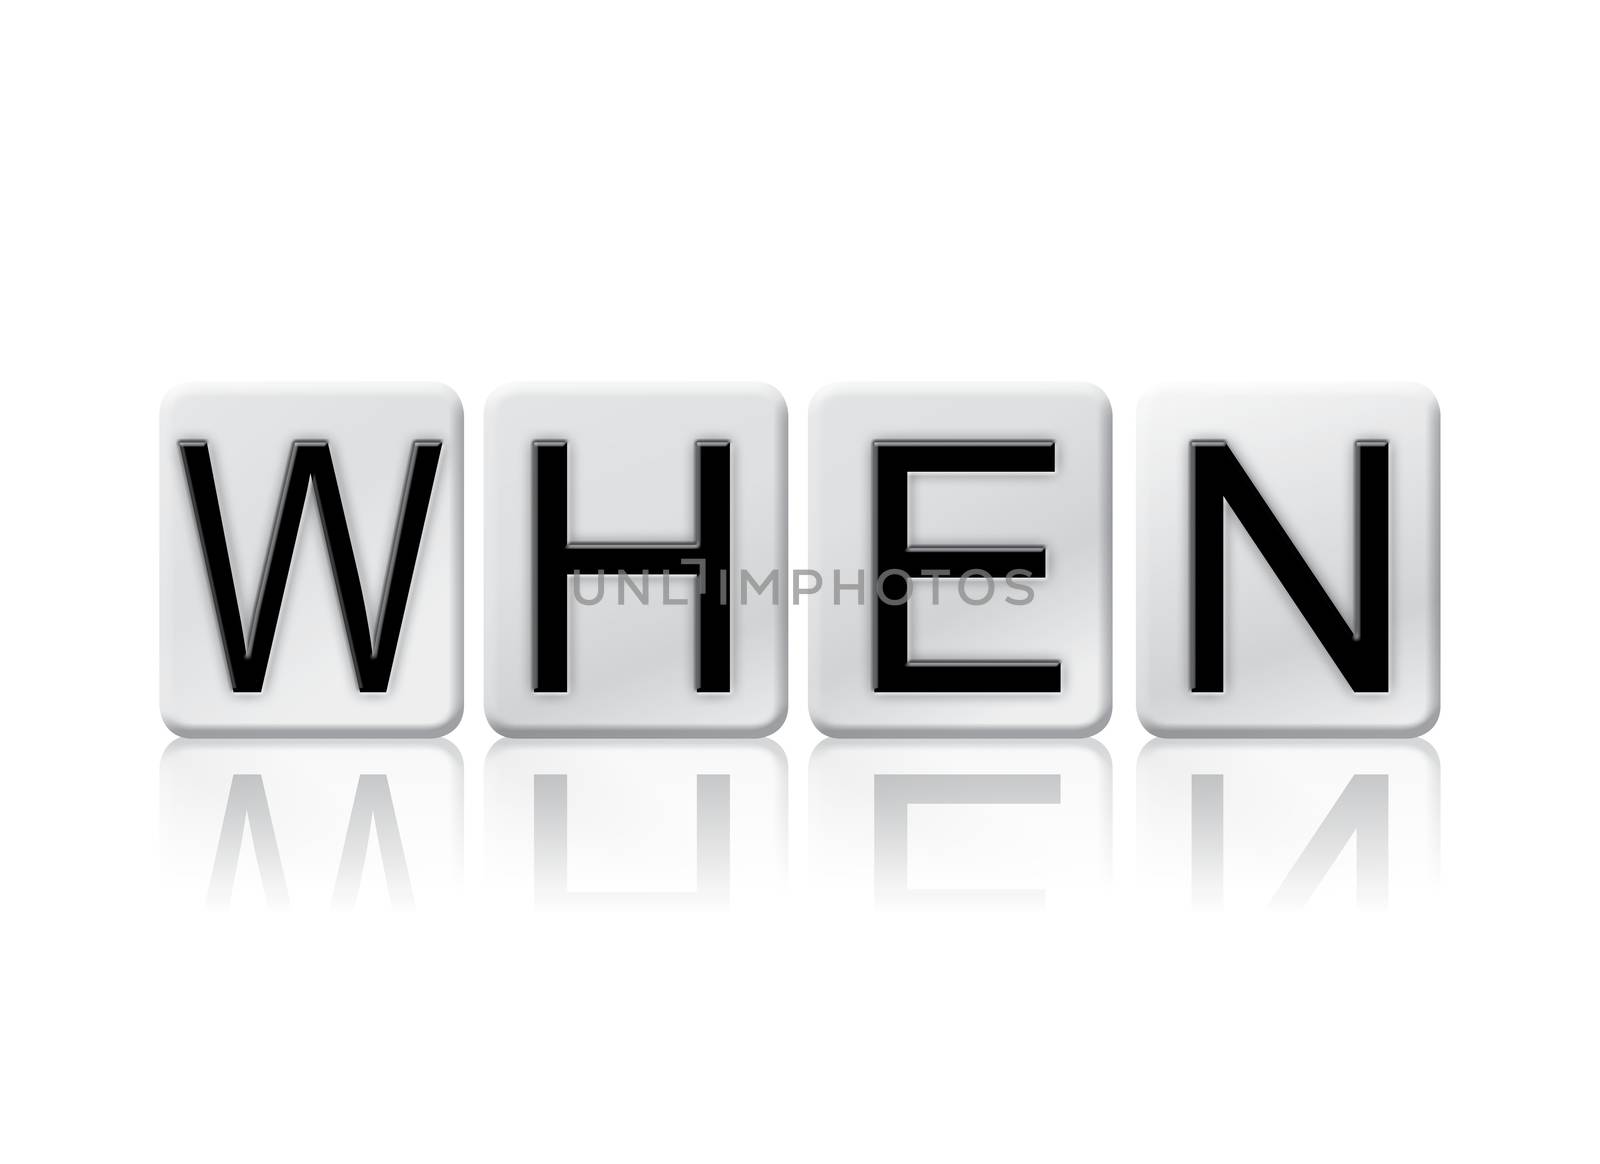 The word "When" written in tile letters isolated on a white background.